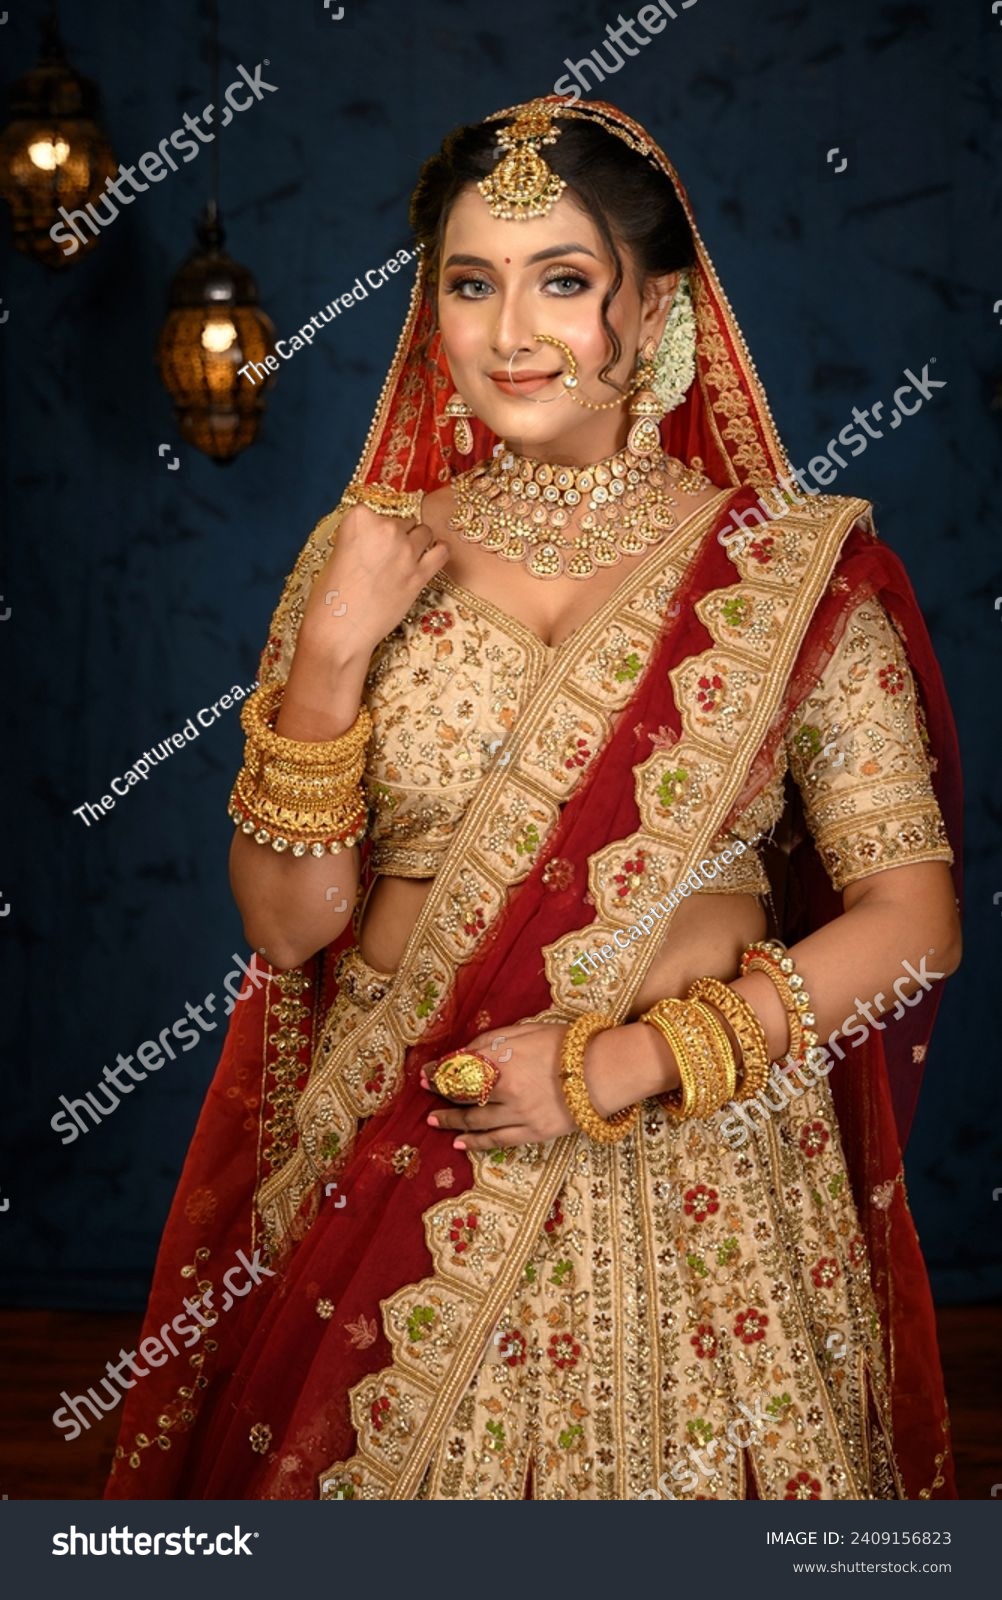 Stunning Indian bride dressed in traditional bridal lehenga with heavy gold jewellery and veil posing fashionable in studio lighting. Wedding fashion and lifestyle. #2409156823